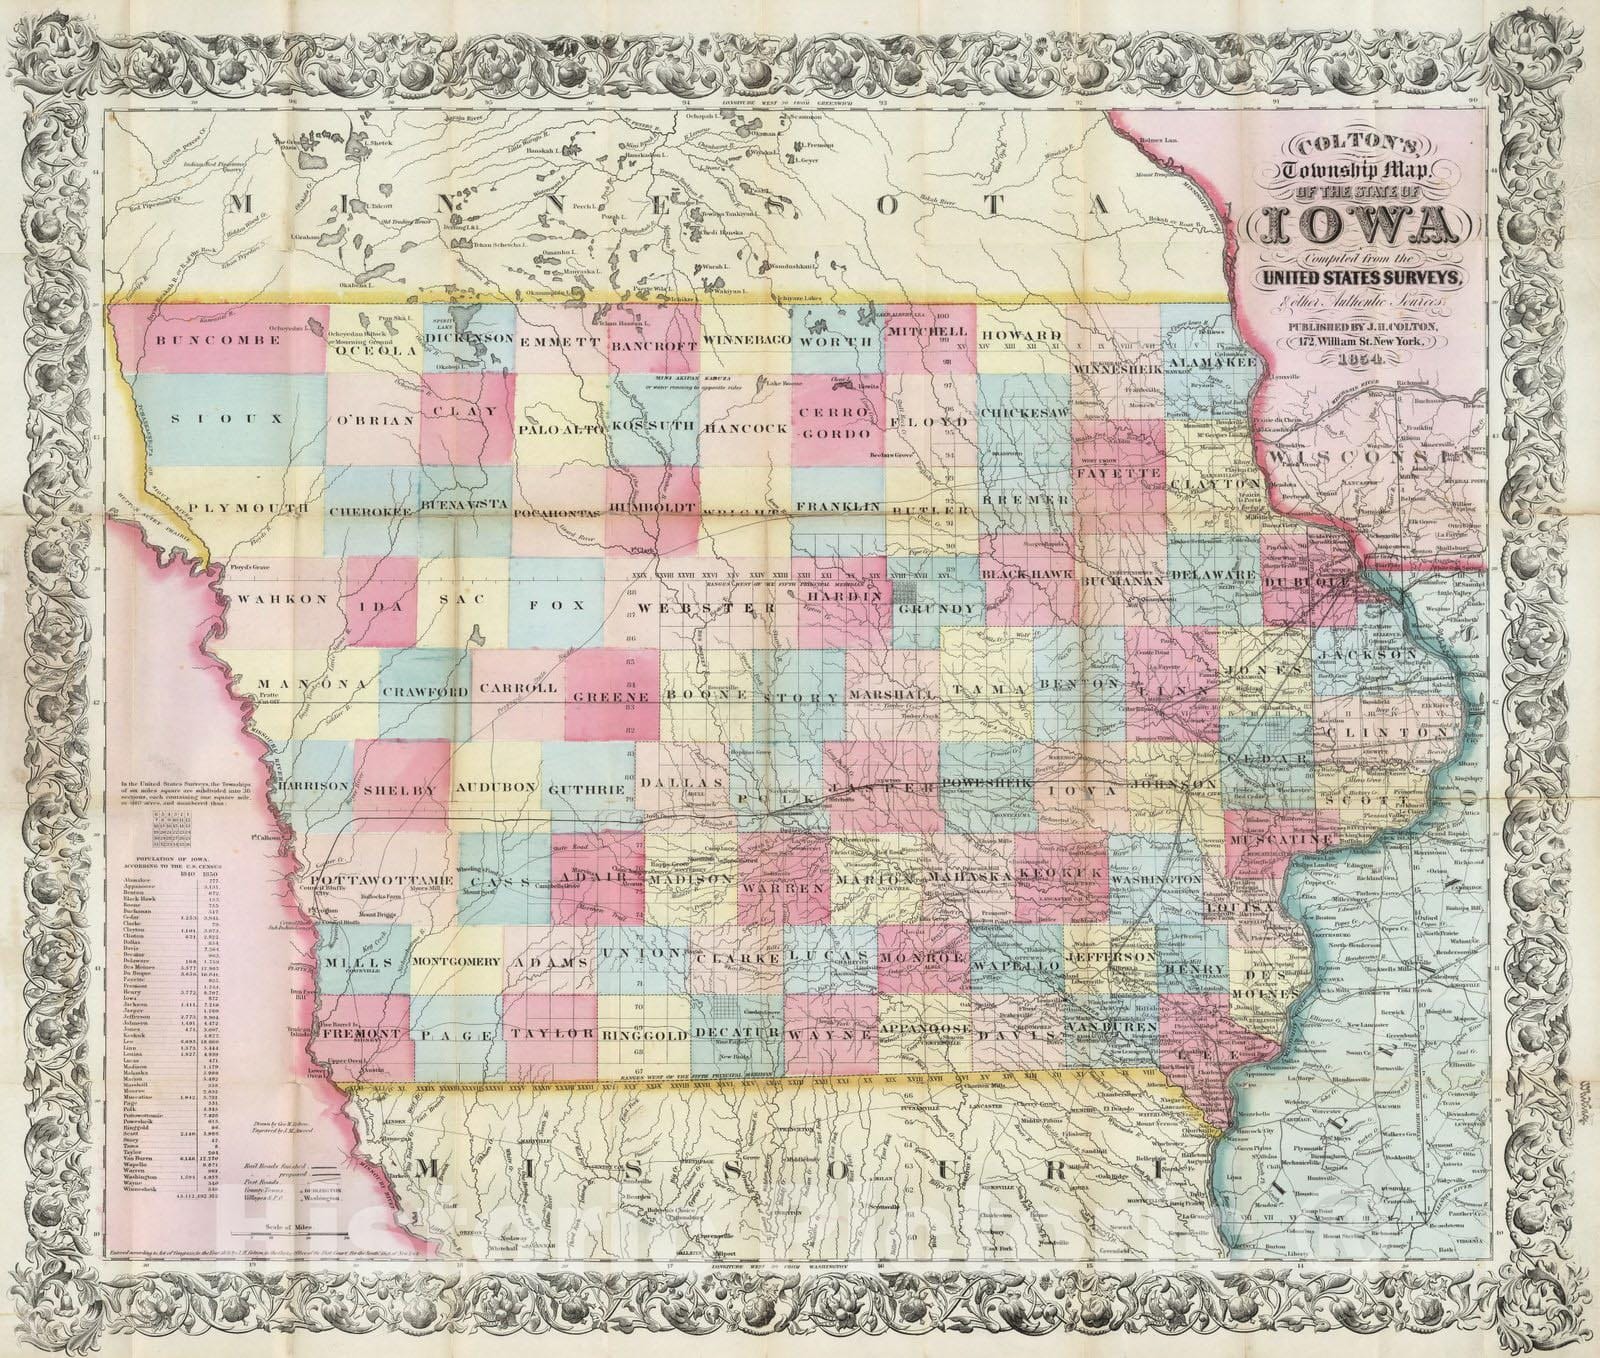 Historic Map : Township Map of The State of Iowa, 1854 - Vintage Wall Art